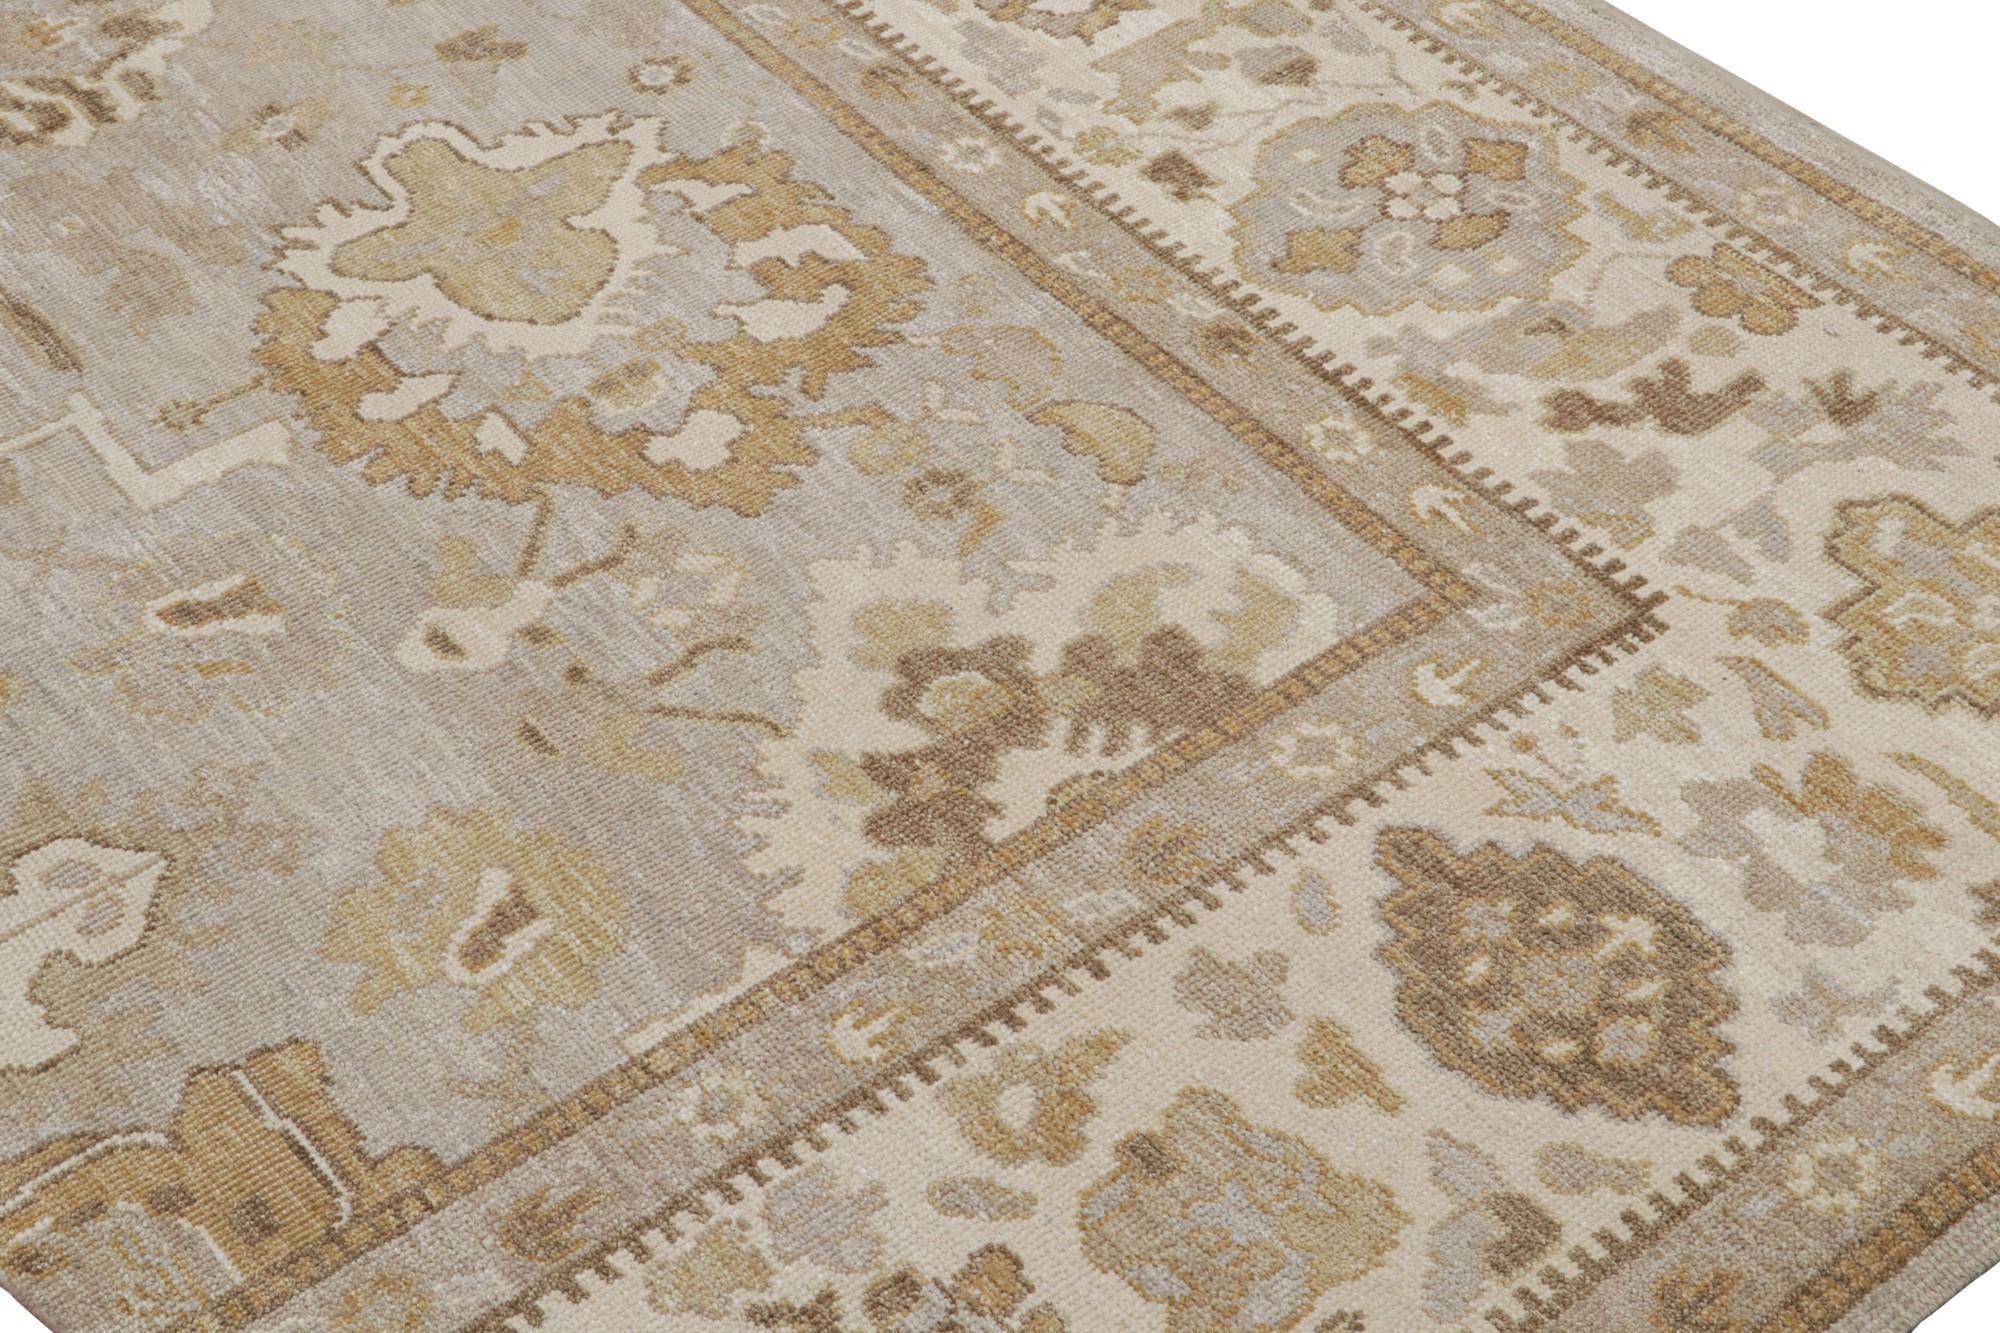 Rug & Kilim’s Oushak Style Rug in Beige-Brown & Gold Floral Pattern In New Condition For Sale In Long Island City, NY